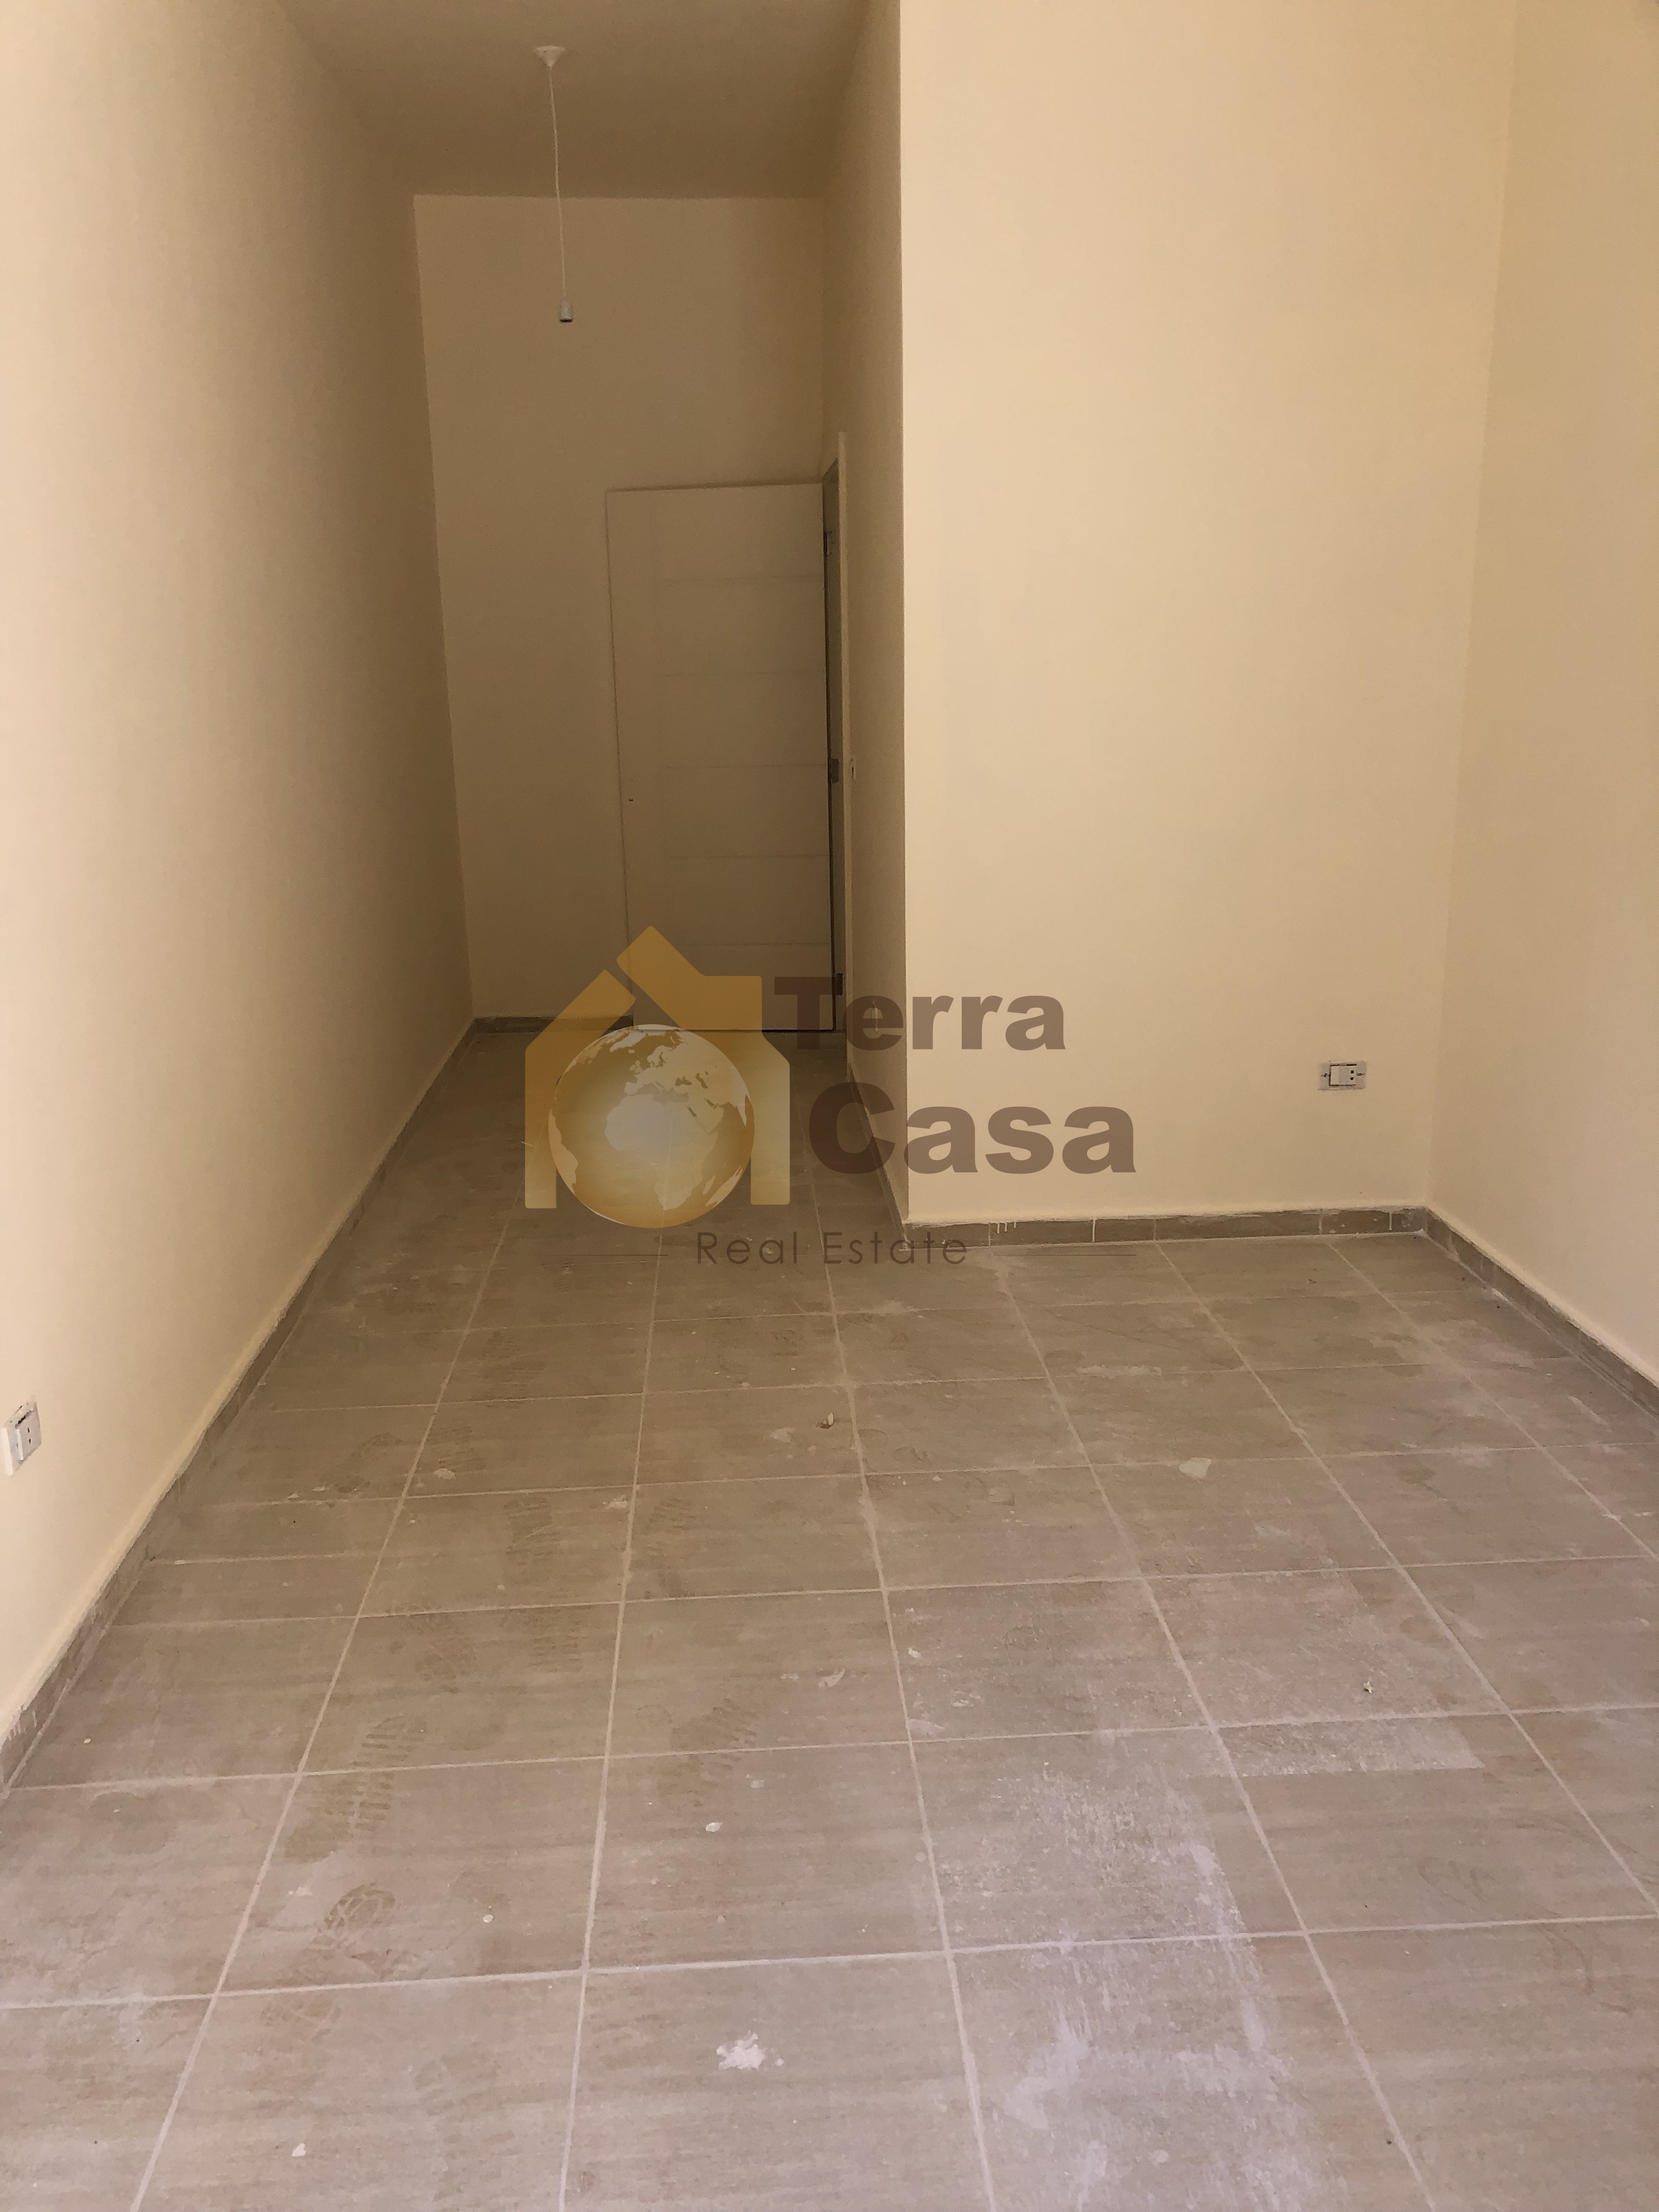 Brand new apartment in wadi chahrour, with roof and terrace Ref#4200